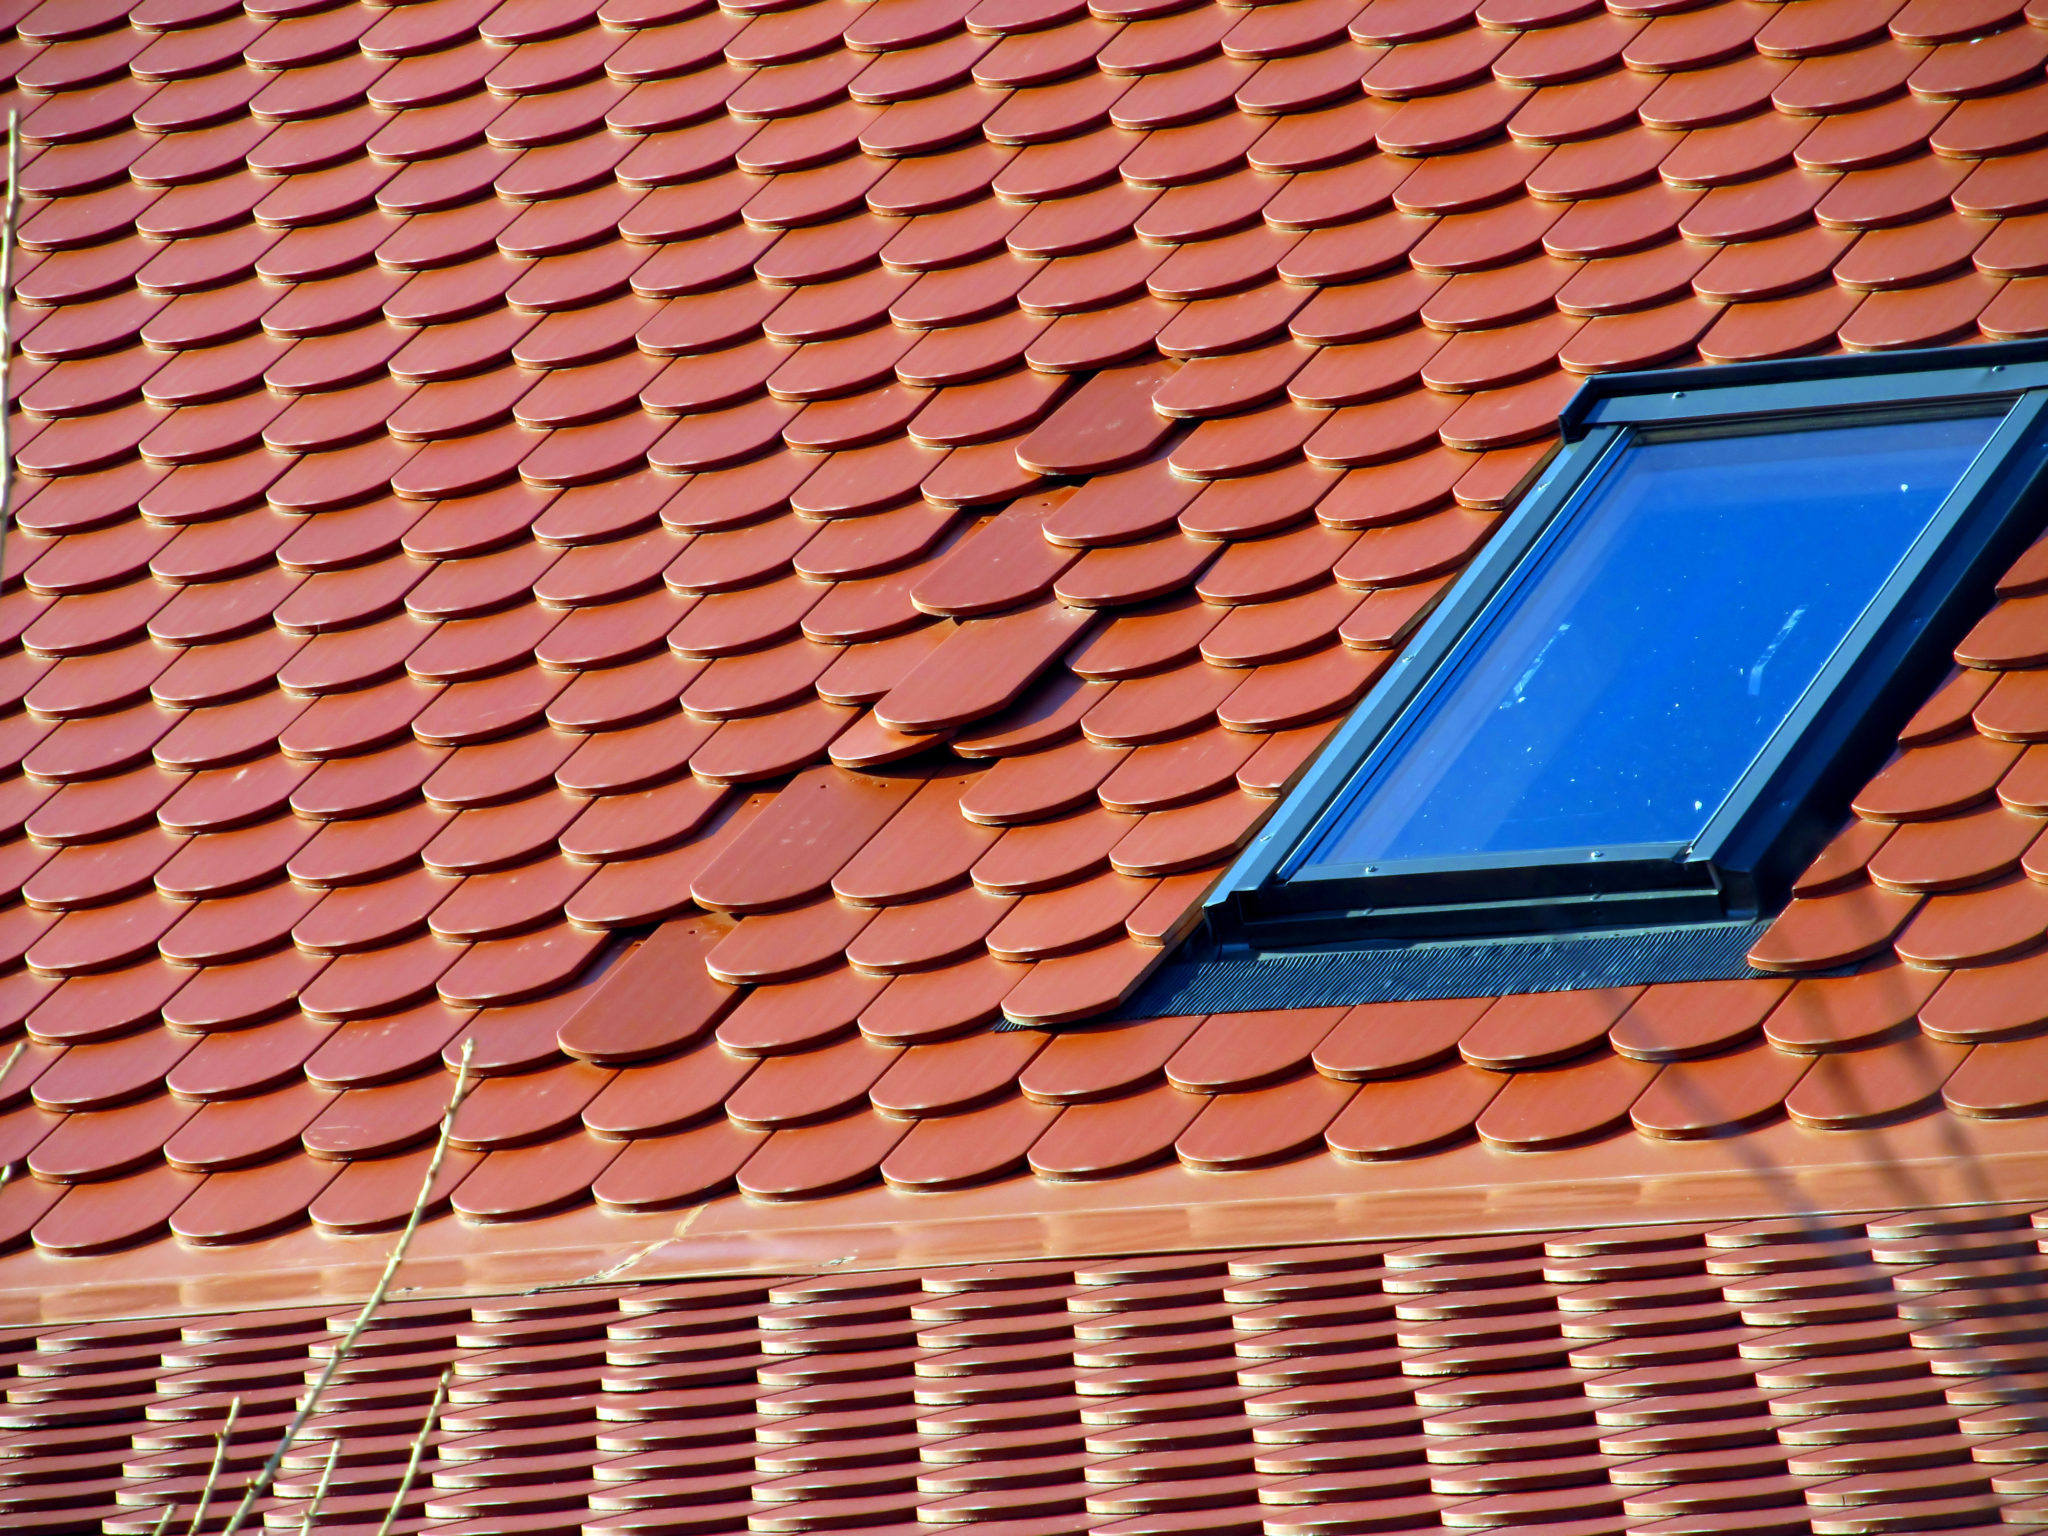 A misaligned roof due to installation error.